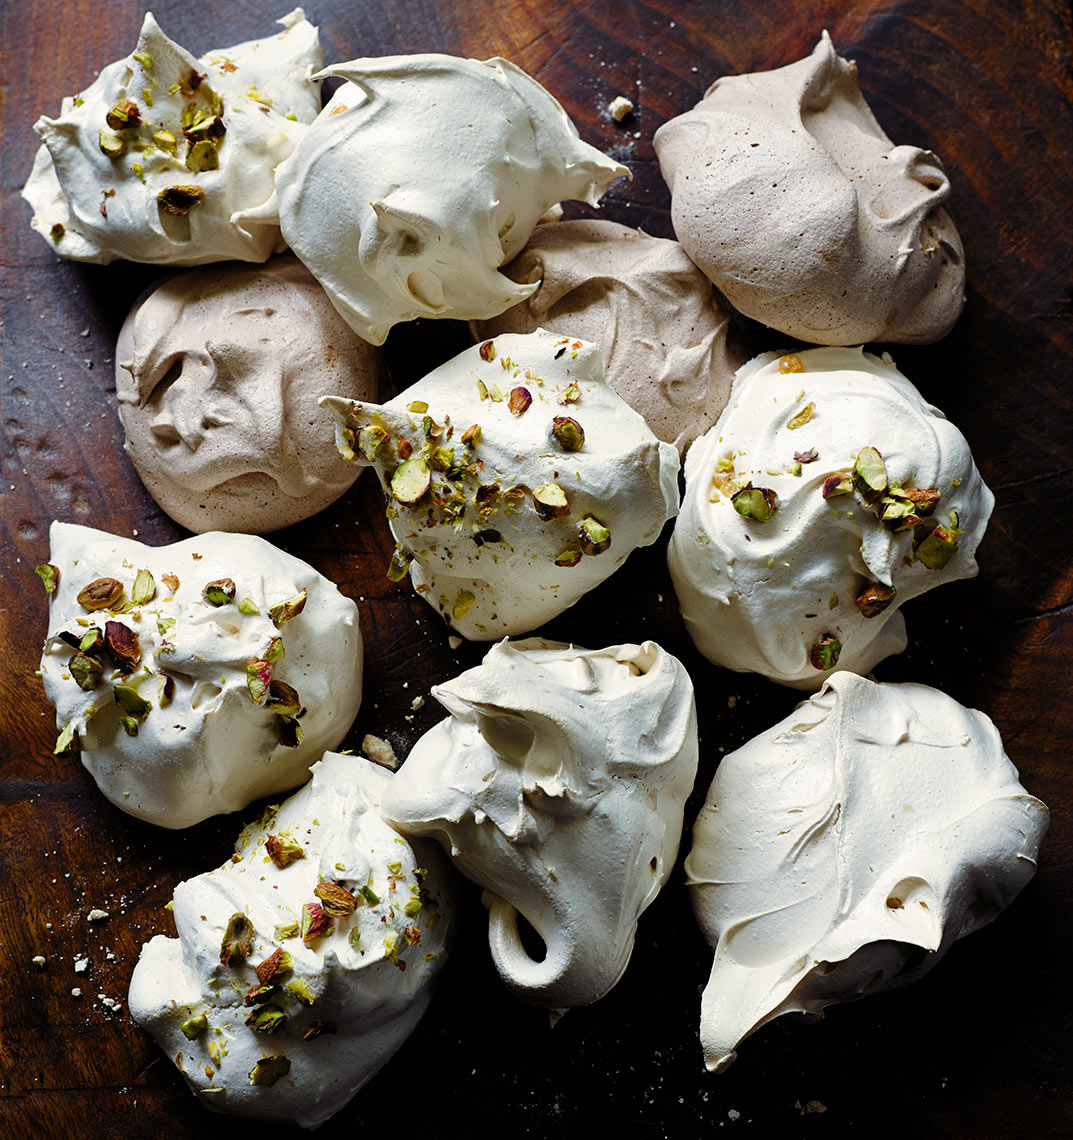 River Cottage Meringues | Colin Campbell - Food Photographer